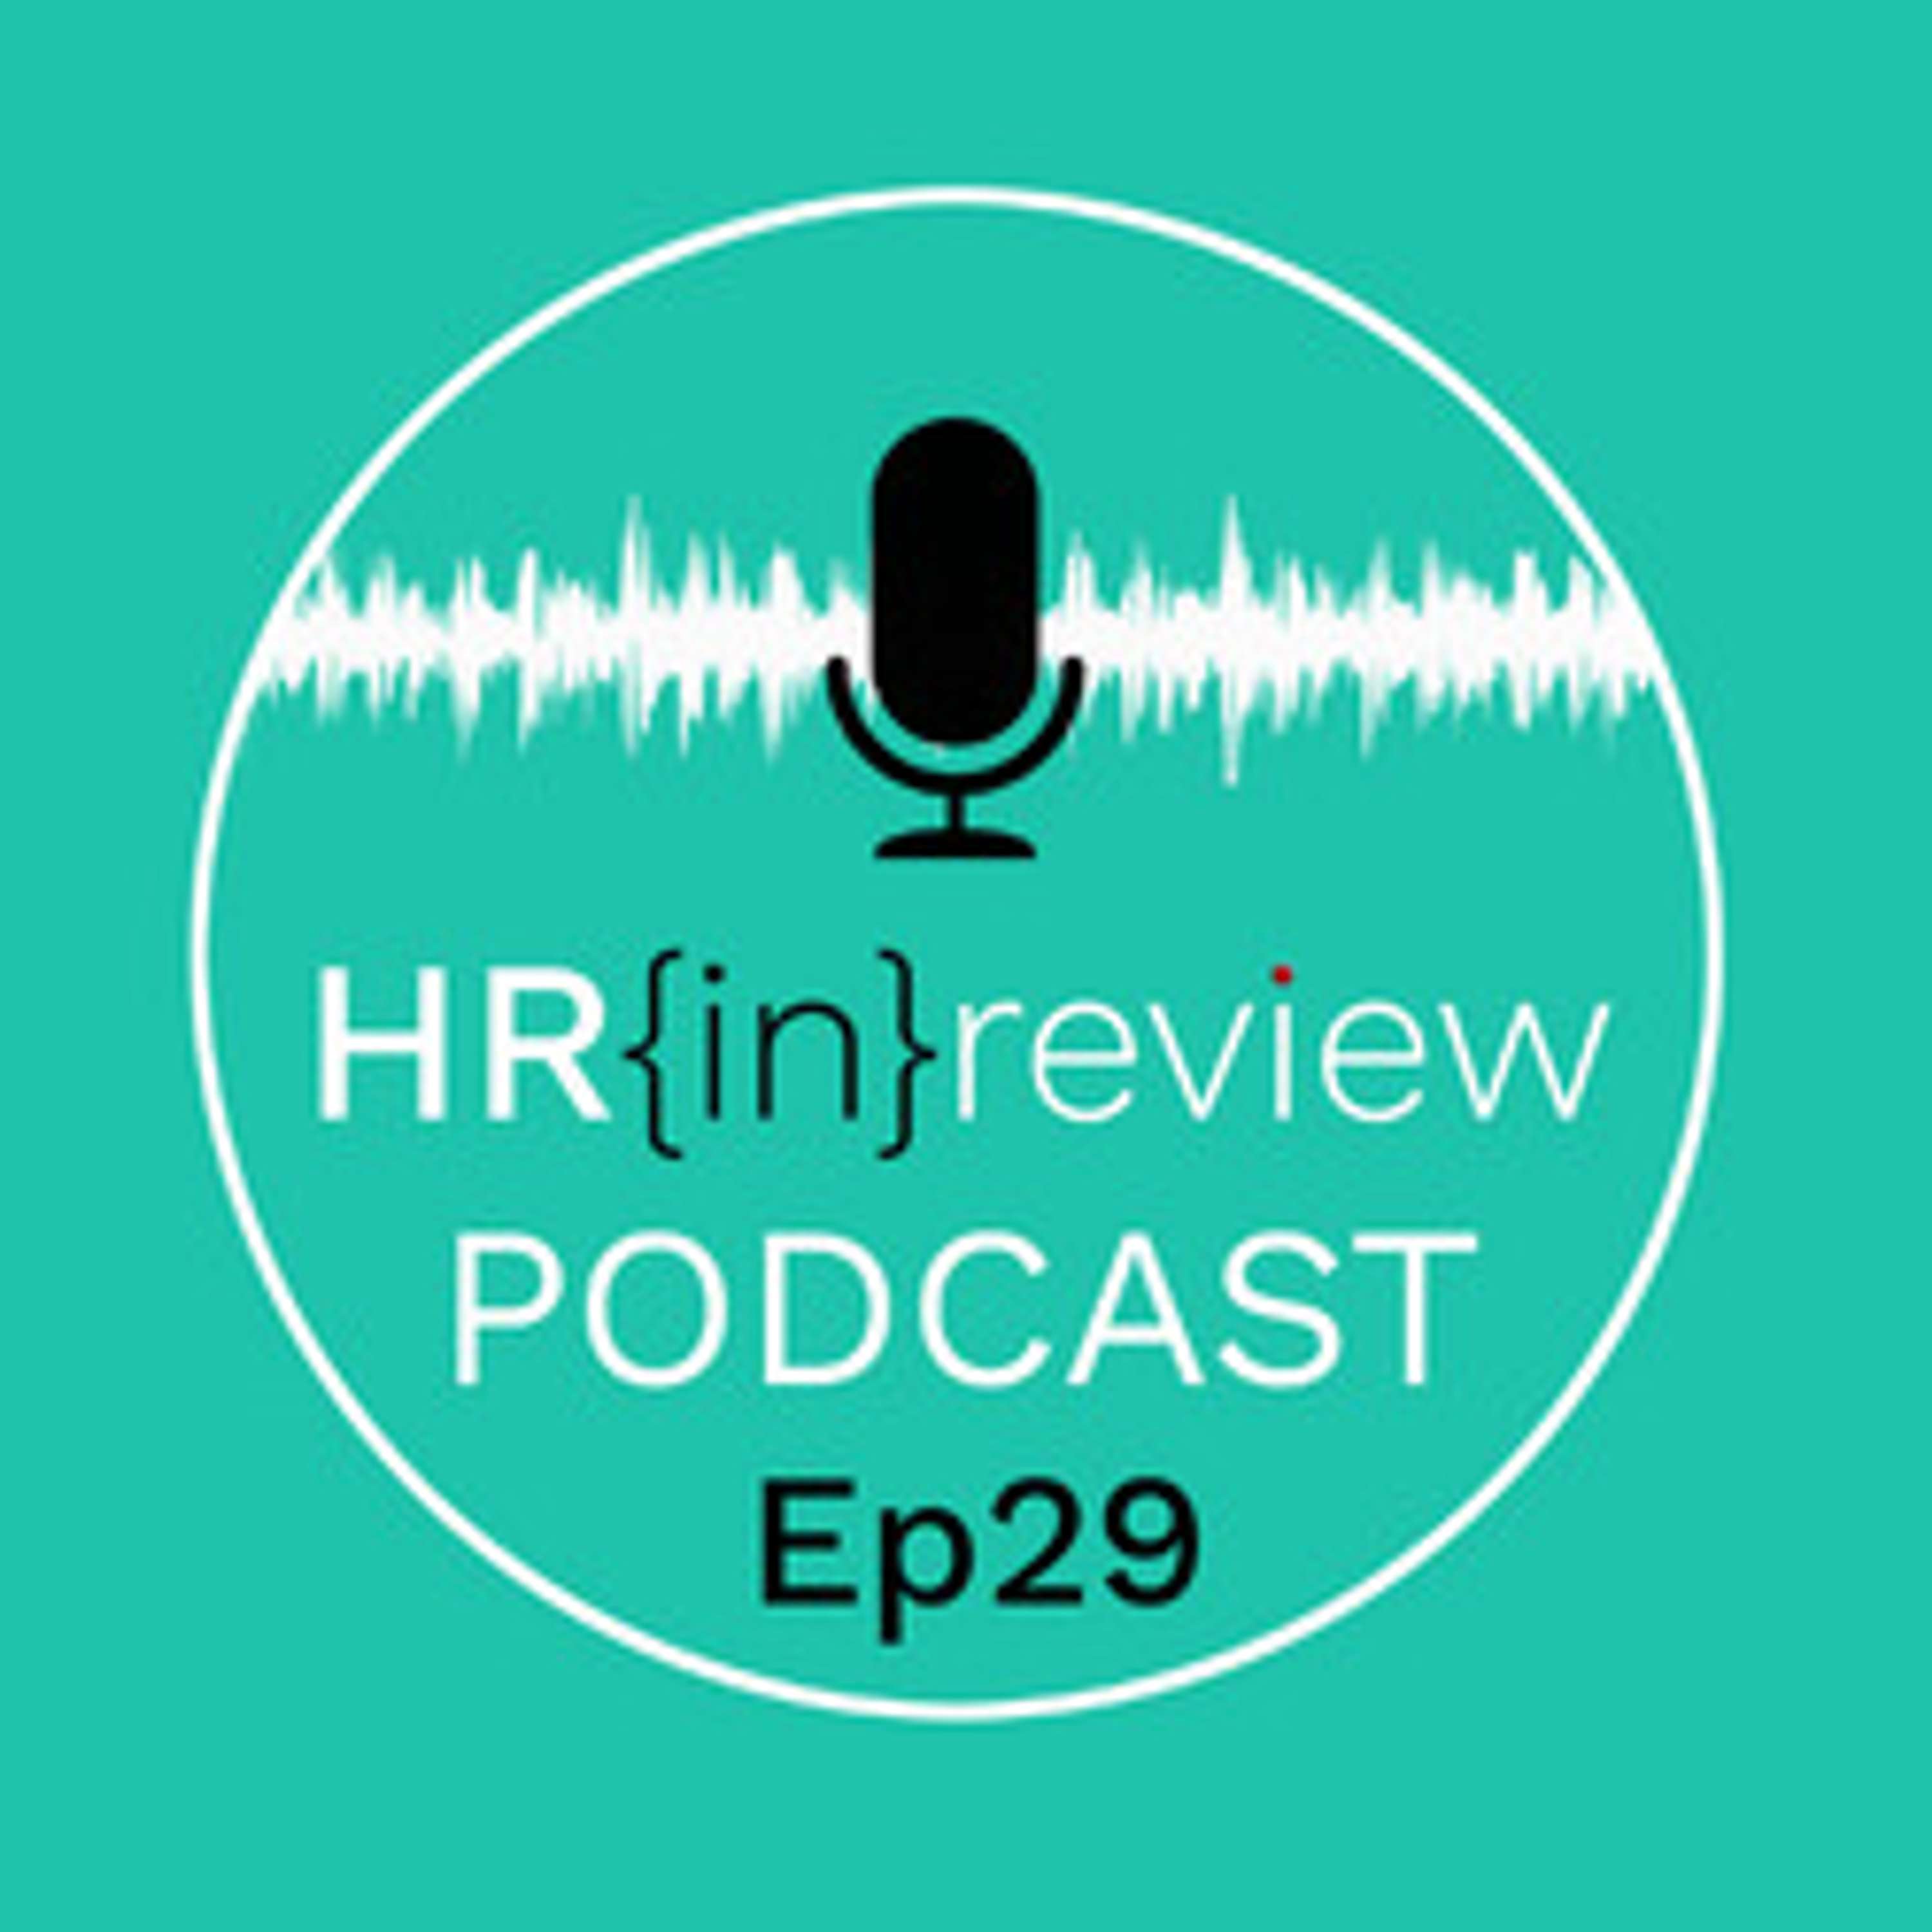 Recruitment and HR Tech Insights with William Tincup